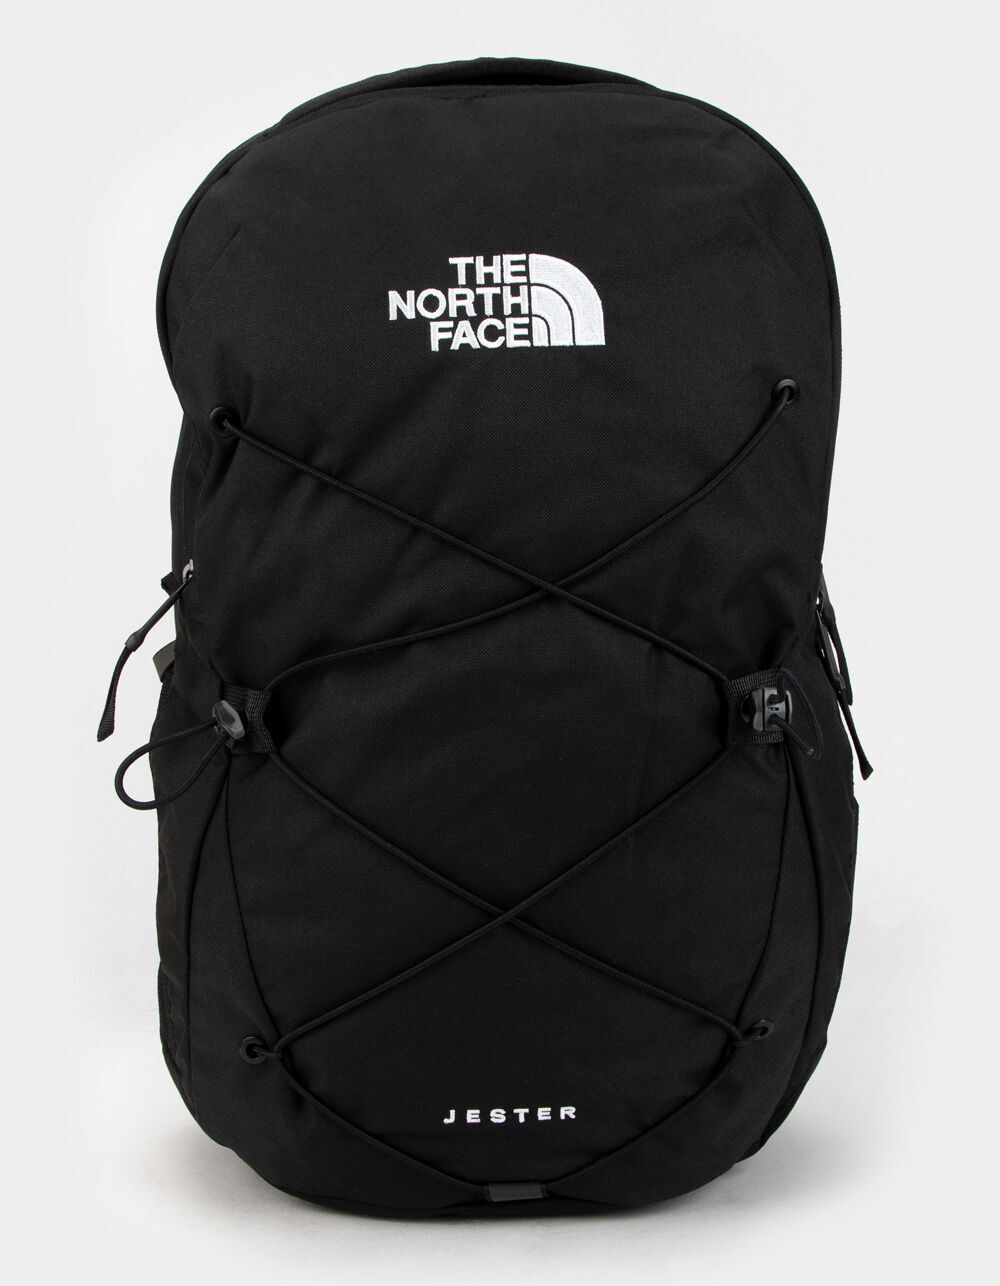 THE NORTH FACE Jester Backpack | Tillys